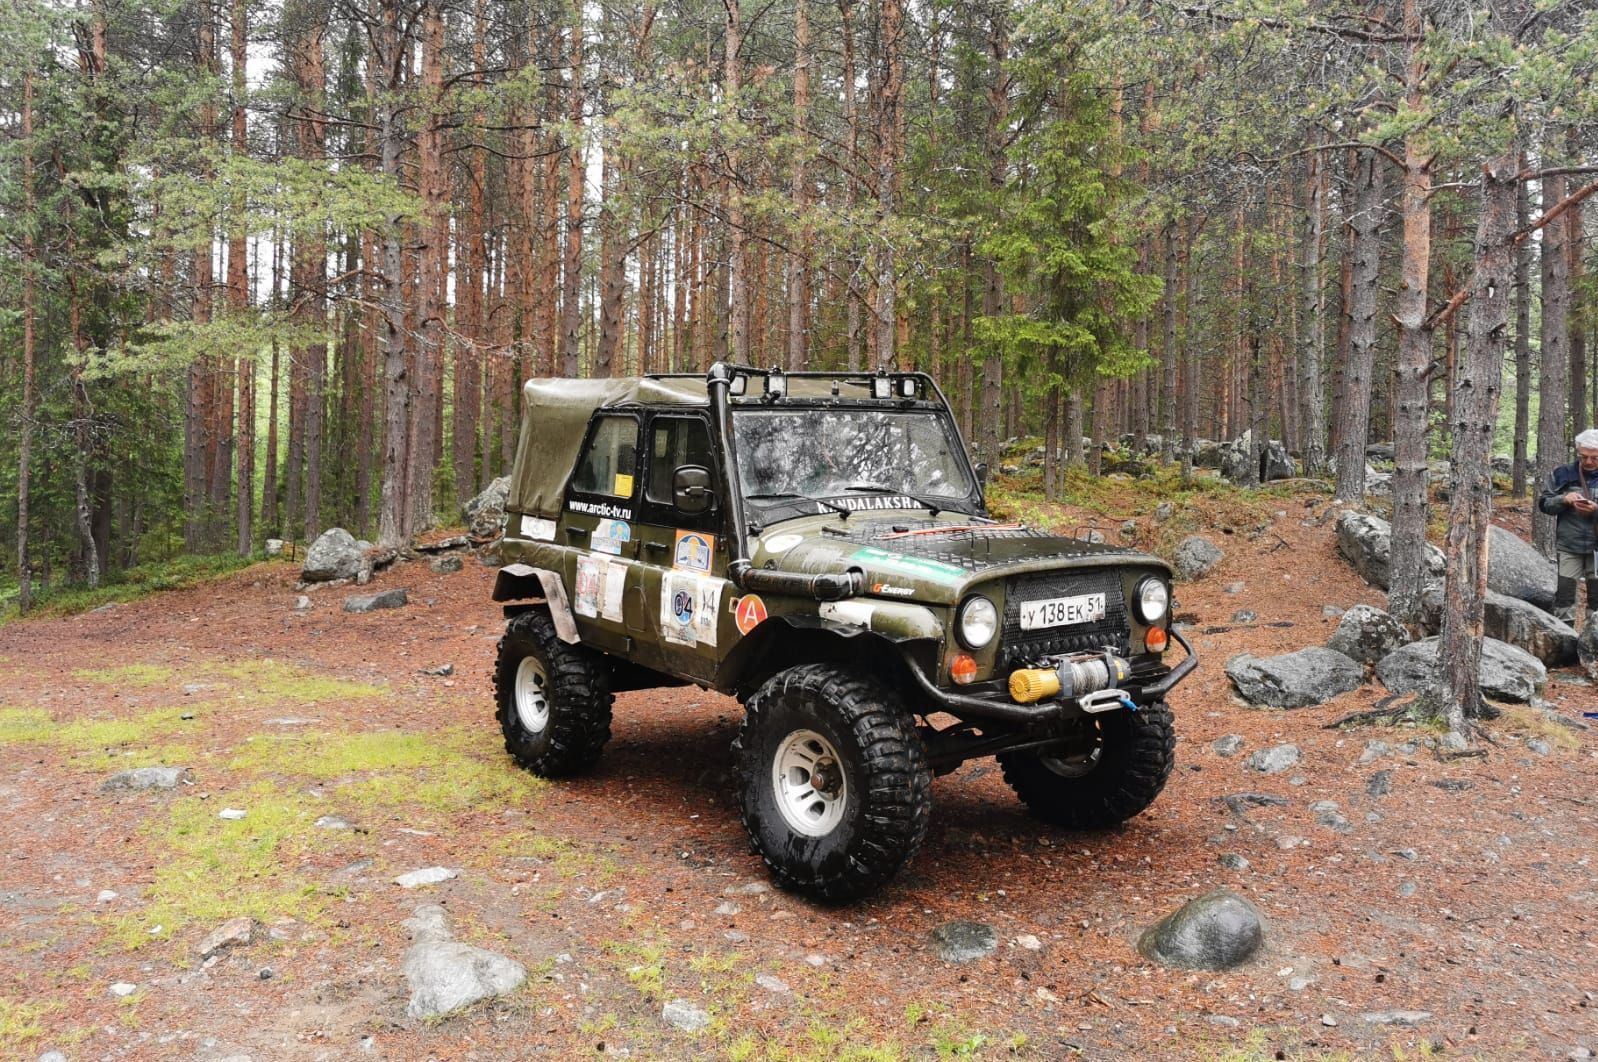 R&T Offroad